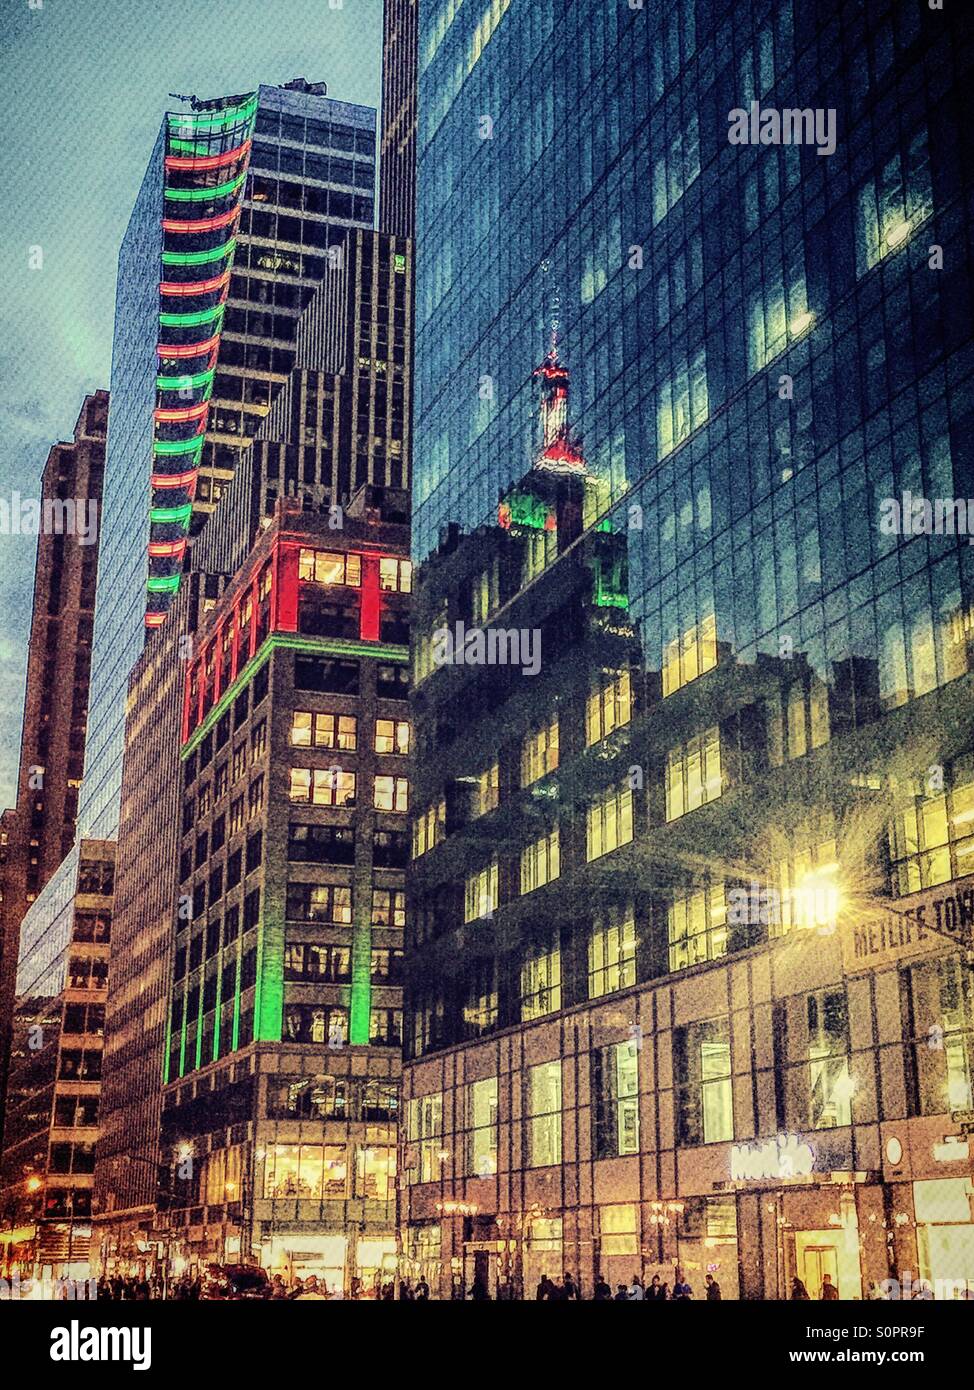 NYC's sixth Avenue is a glow with red and green holiday lights and reflections of the Empire State Building. Stock Photo